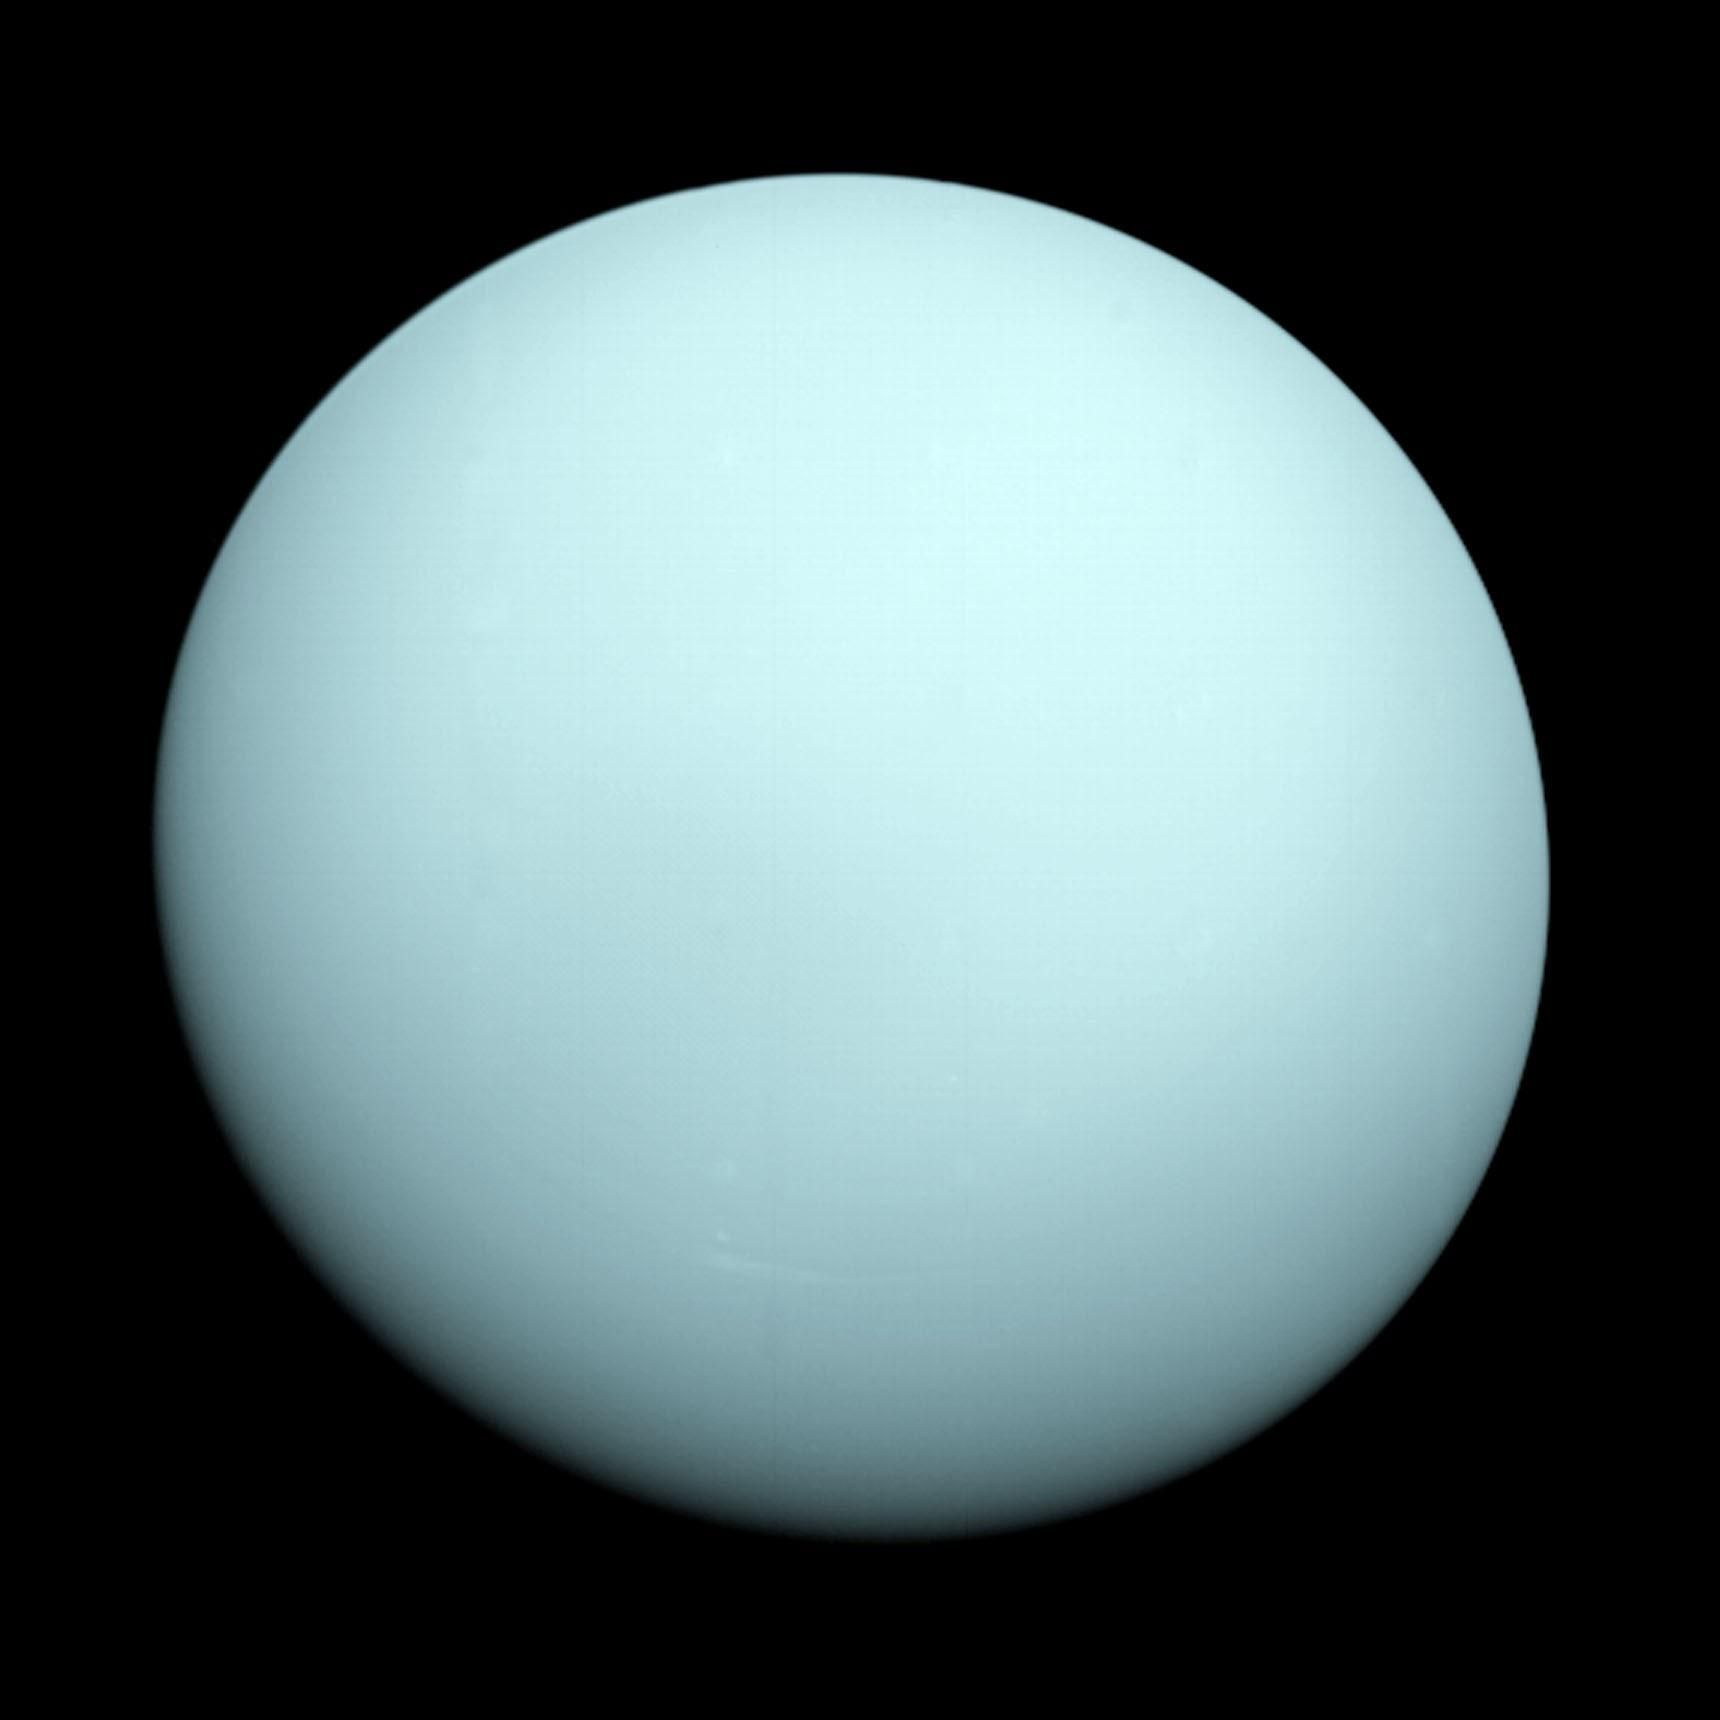 A pale blue planet as seen from a spacecraft